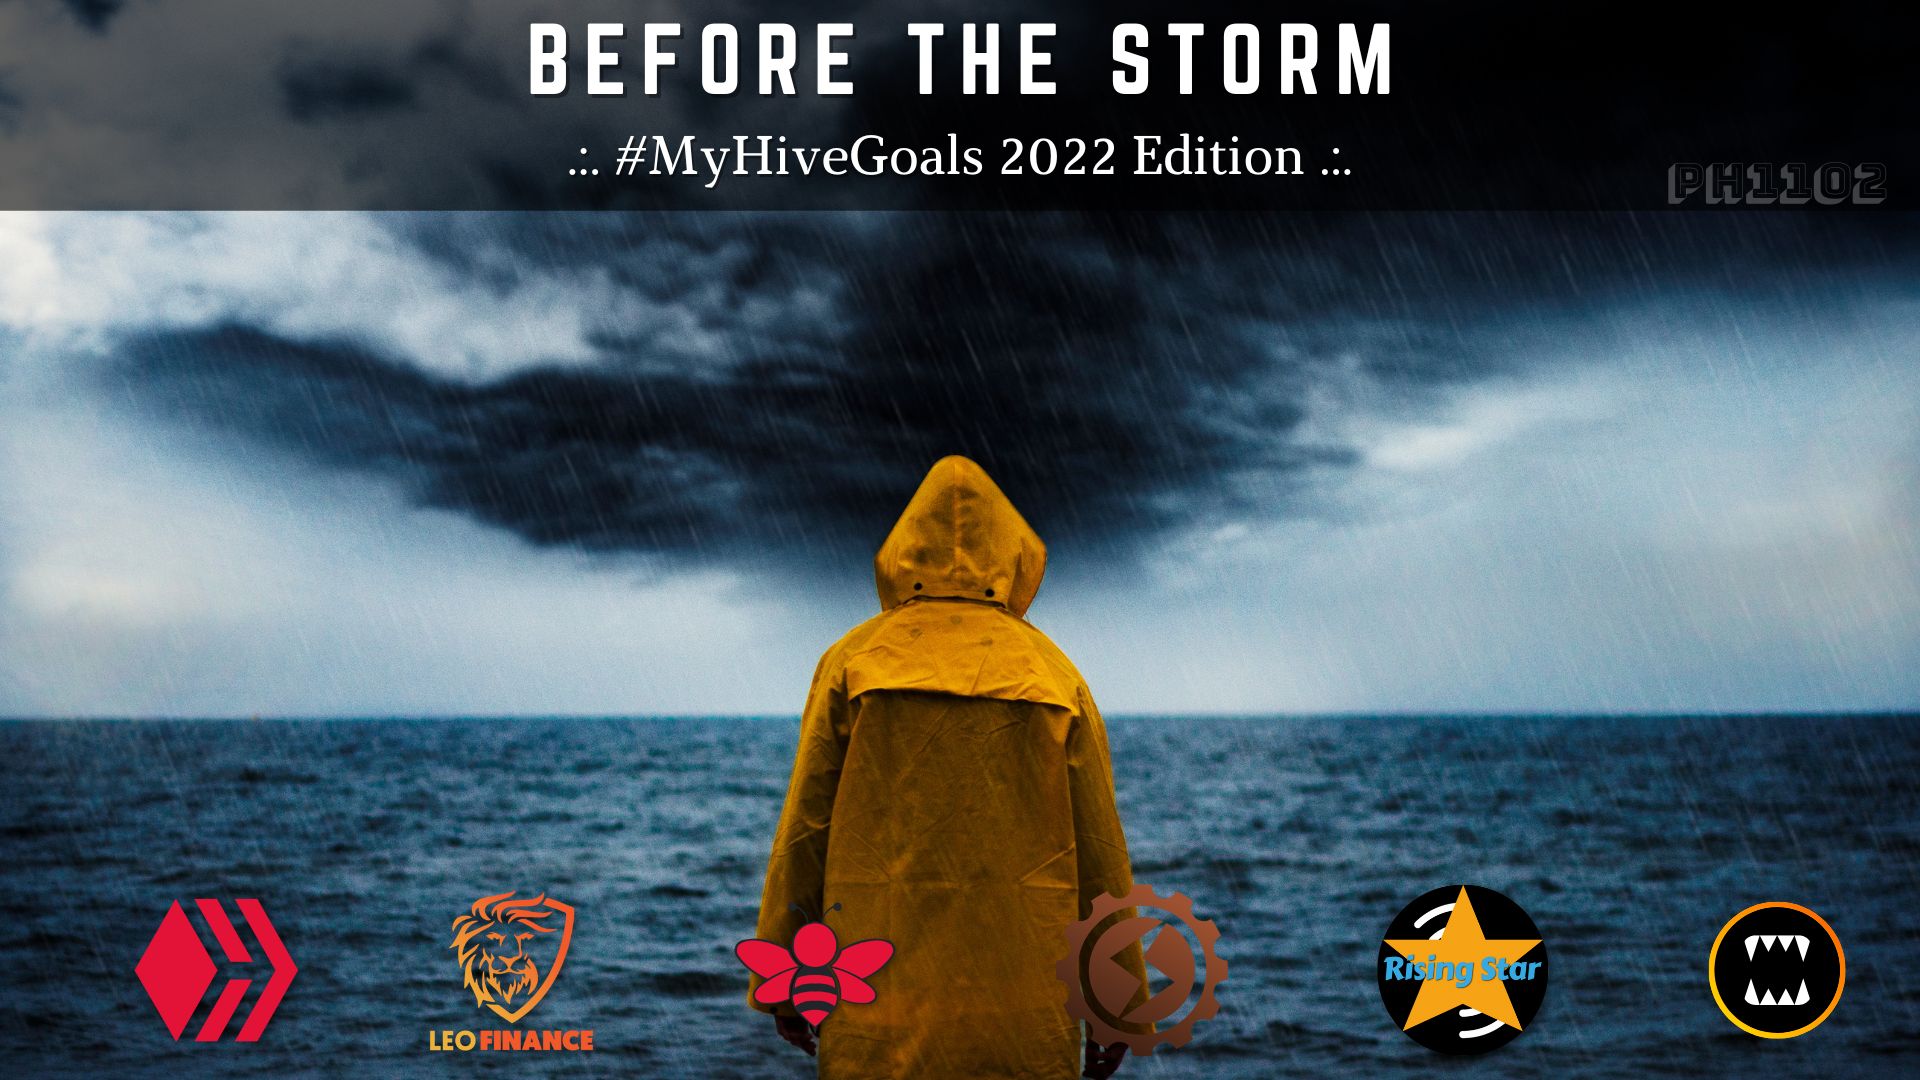 @ph1102/before-the-storm-myhivegoals-2022